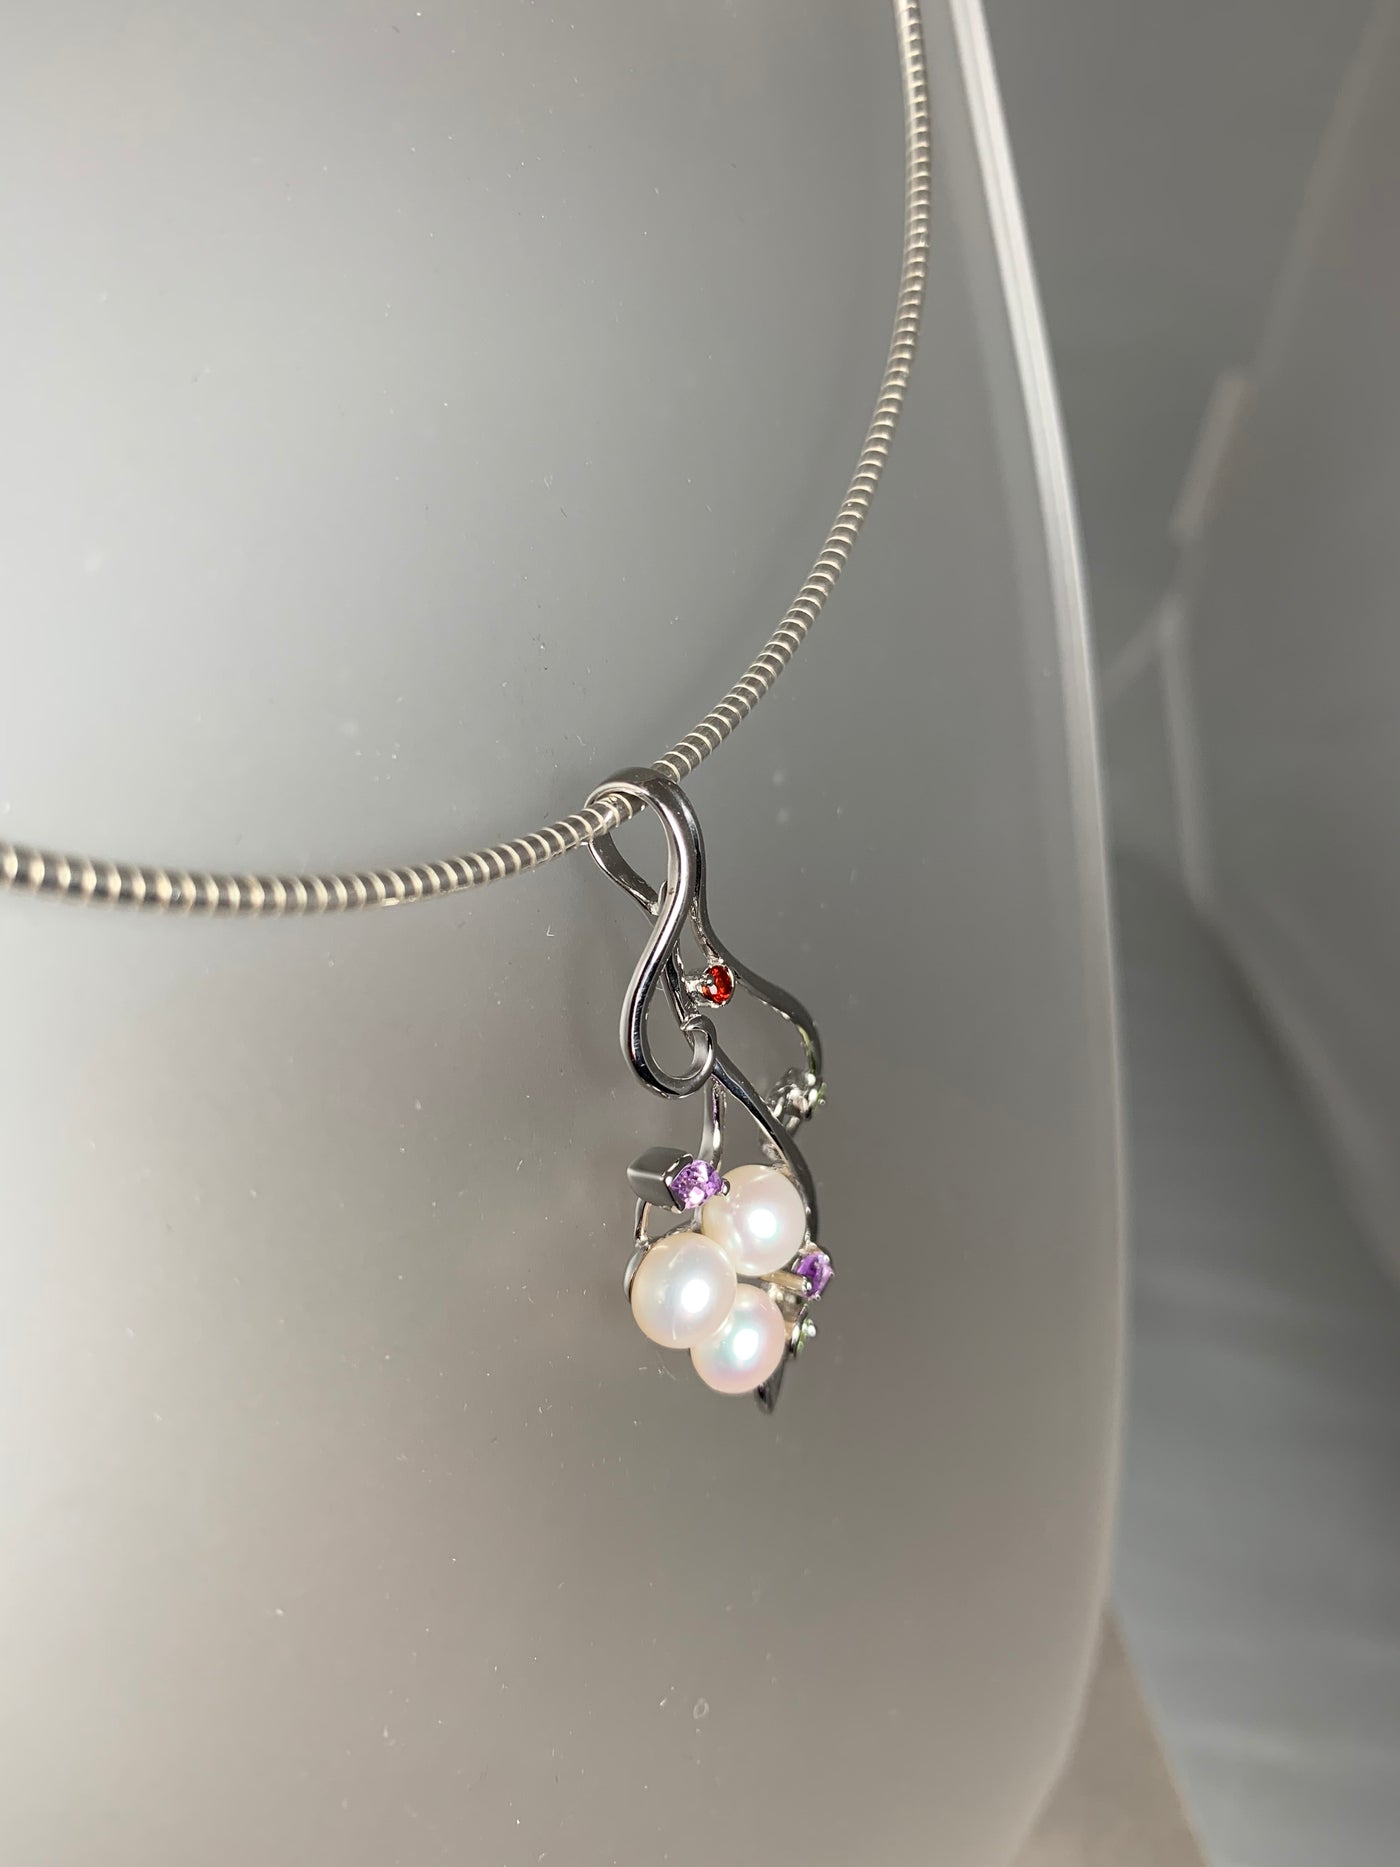 Curly Vine Triple Pearls Pendant with Amethyst Garnet Peridot Accent in Silver